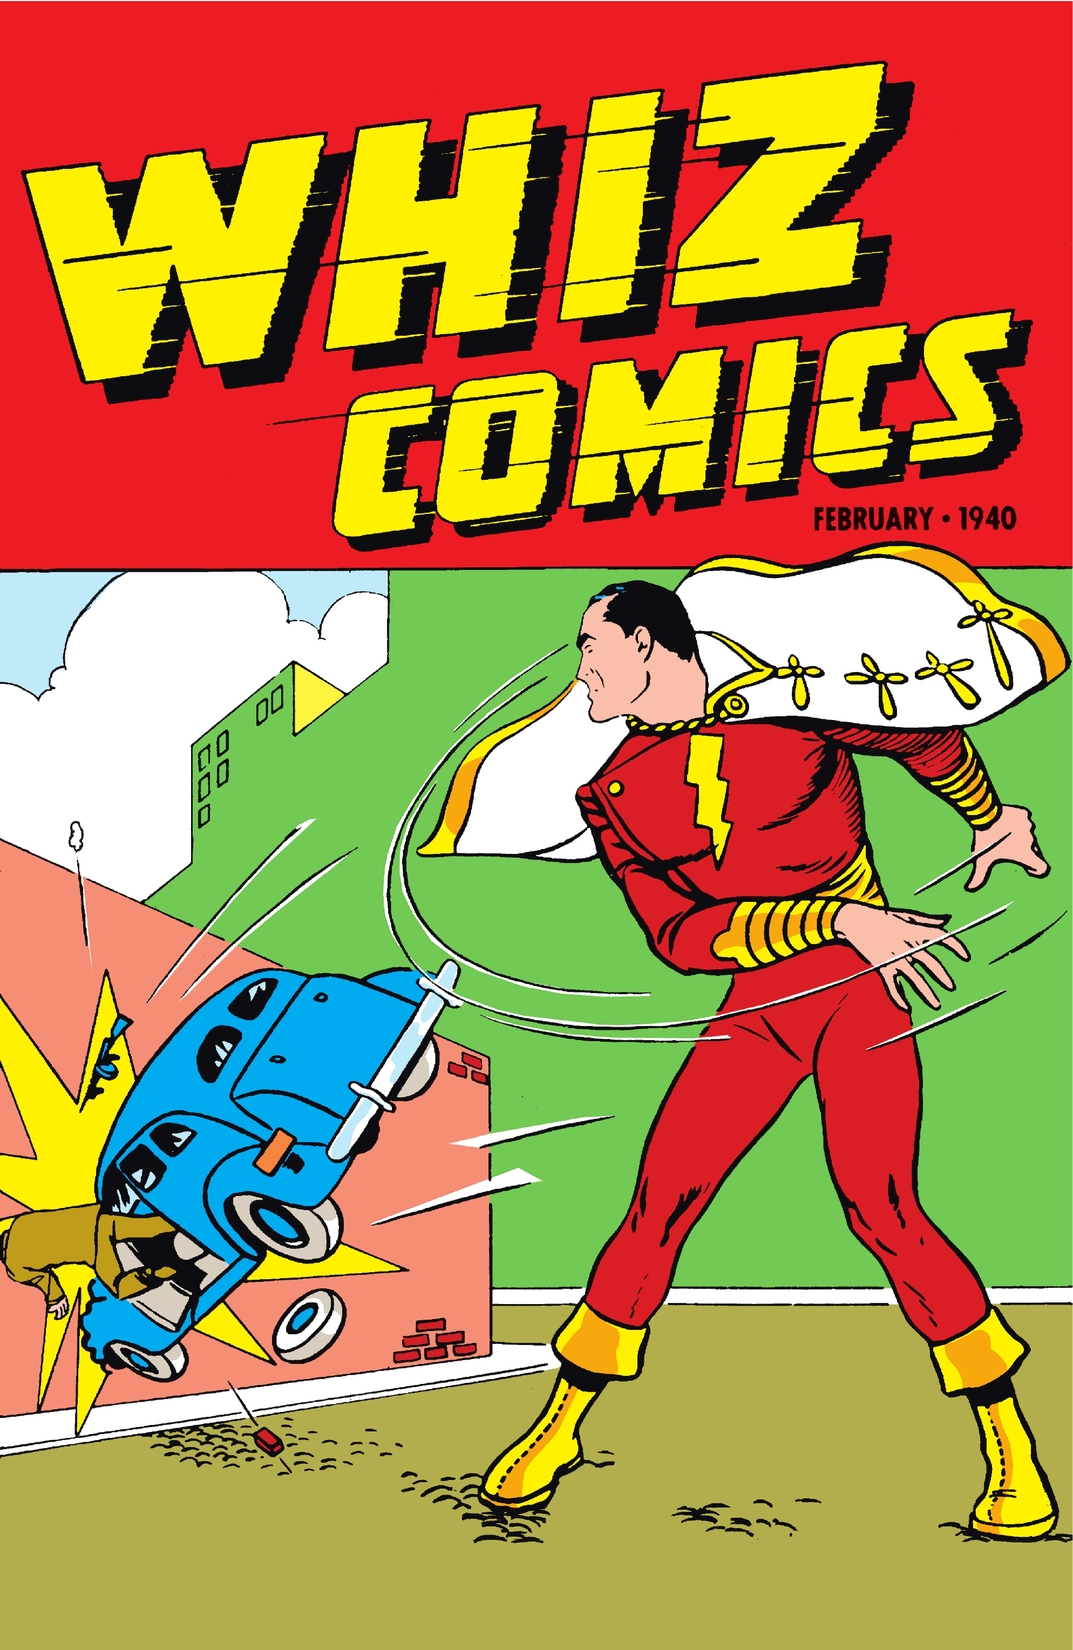 Whiz Comics #2 preview images